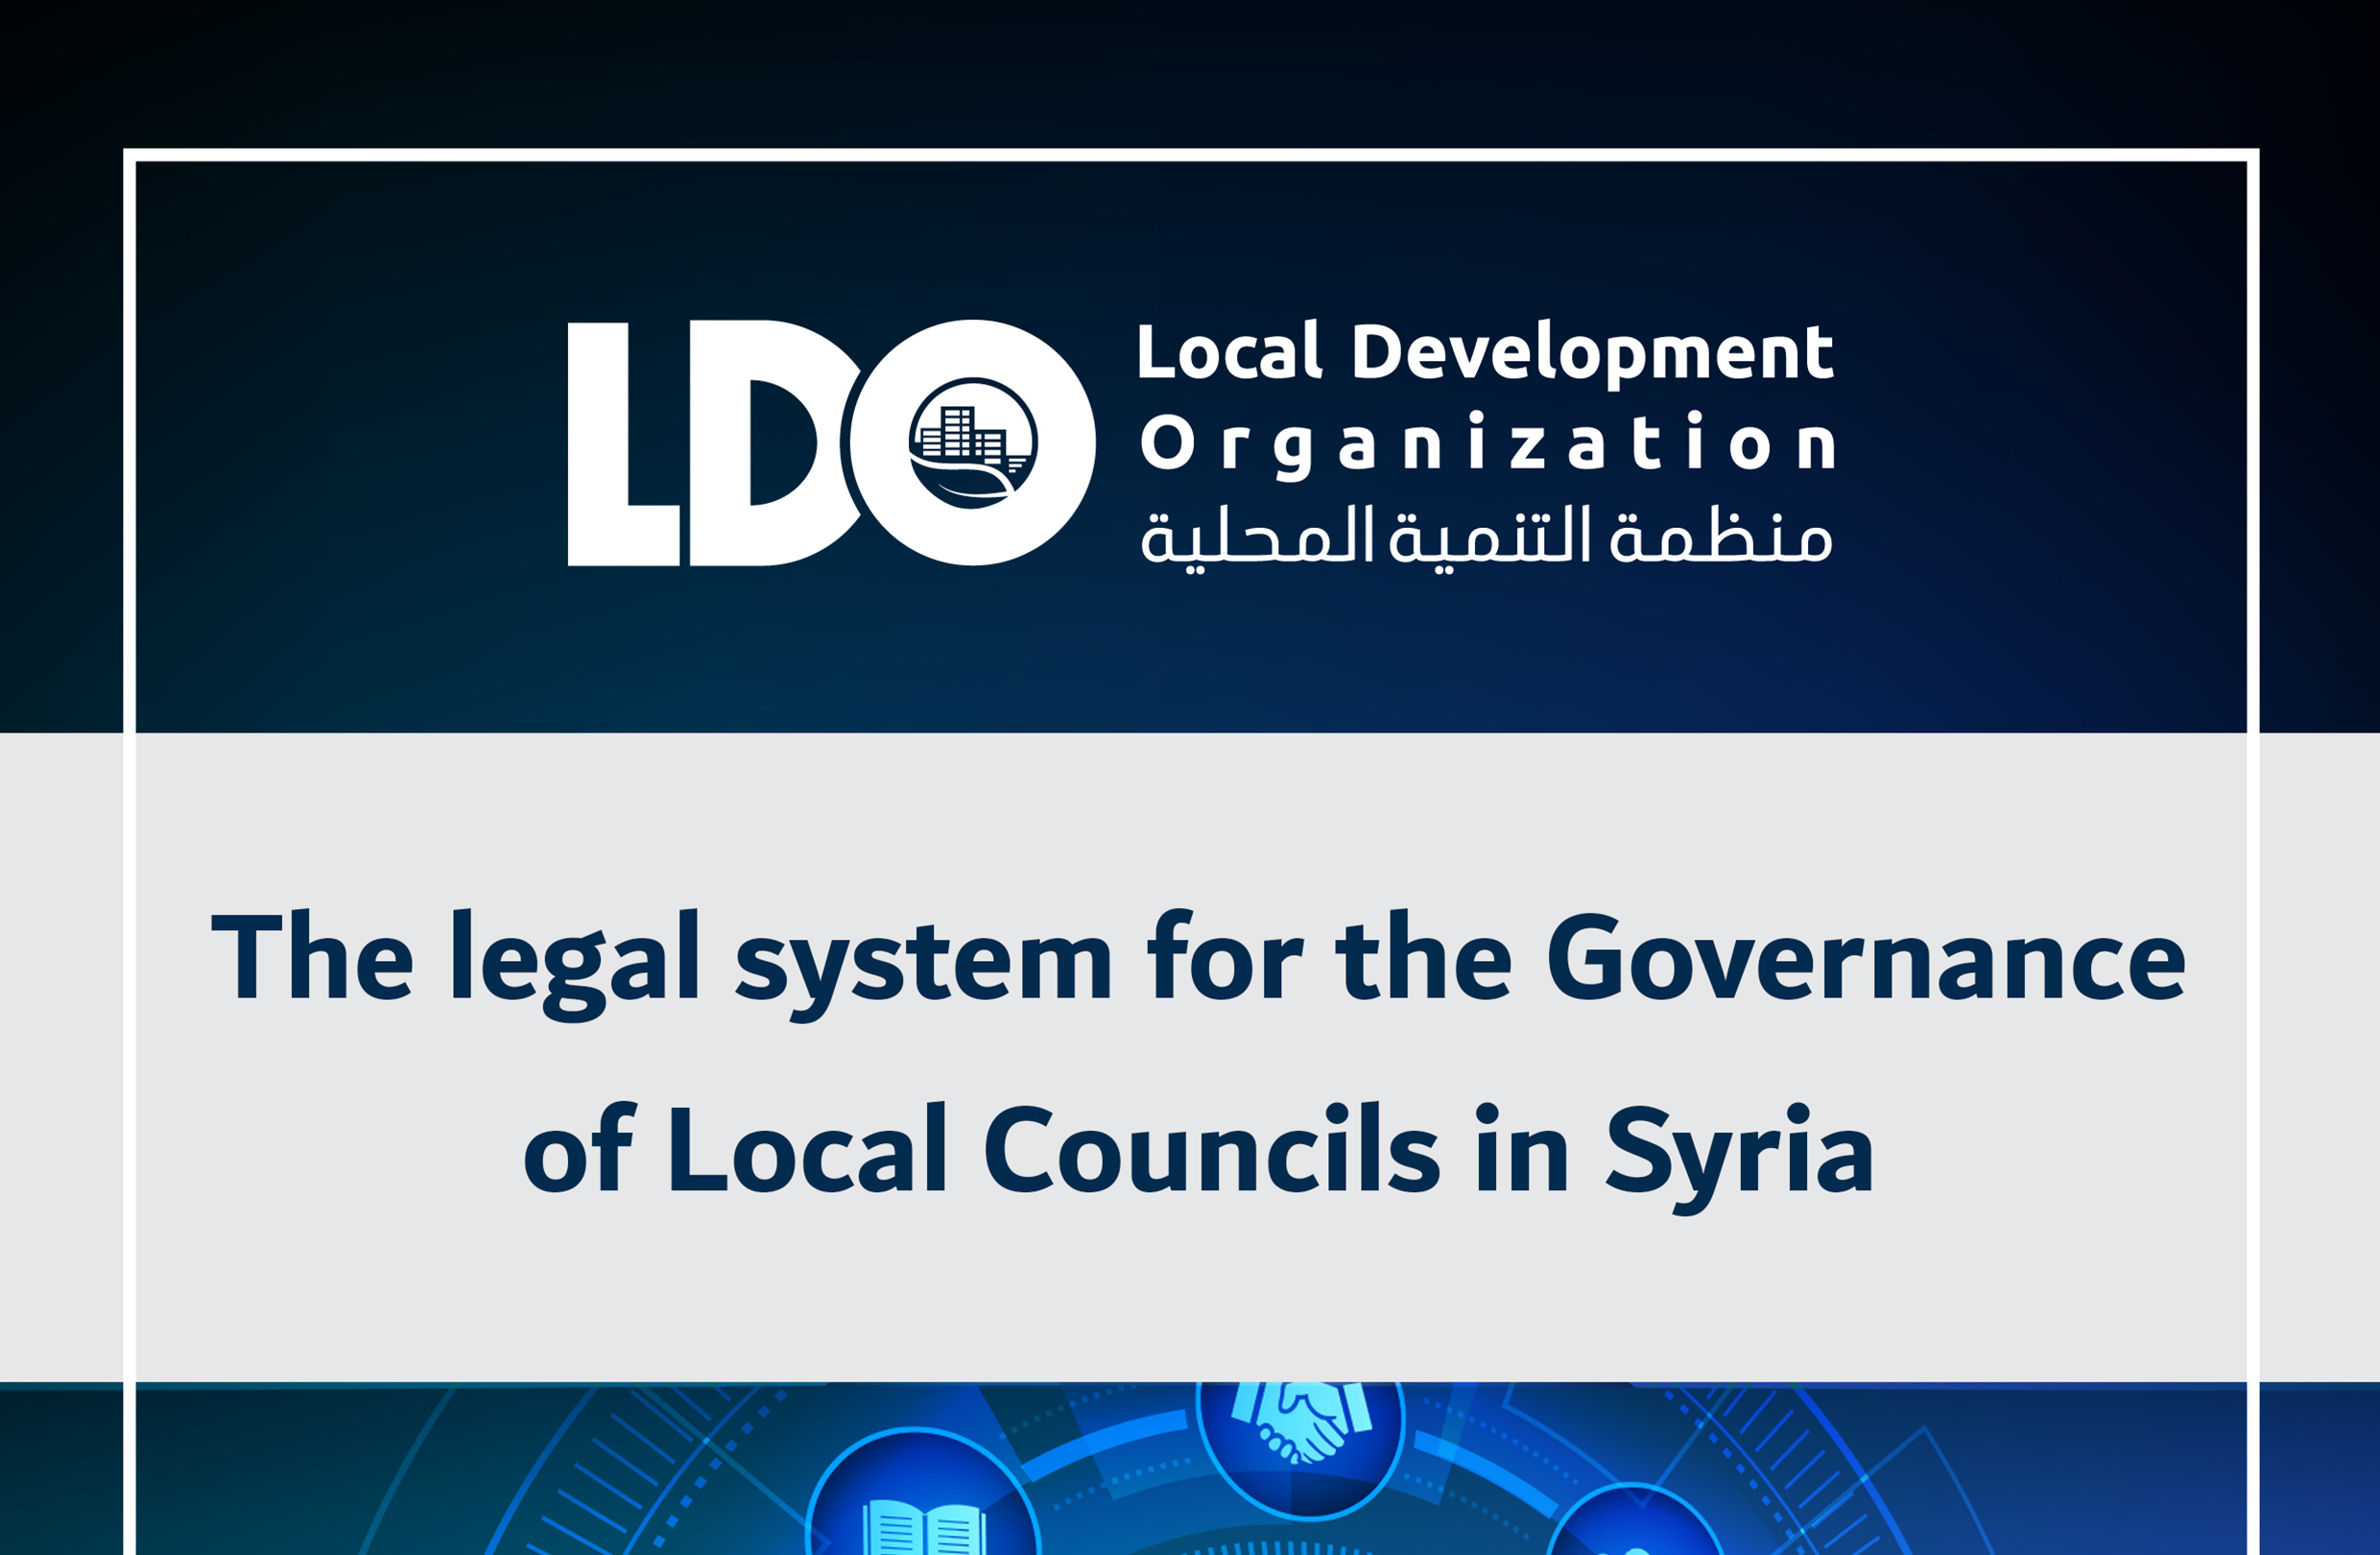 The legal system for the Governance of Local Councils in Syria